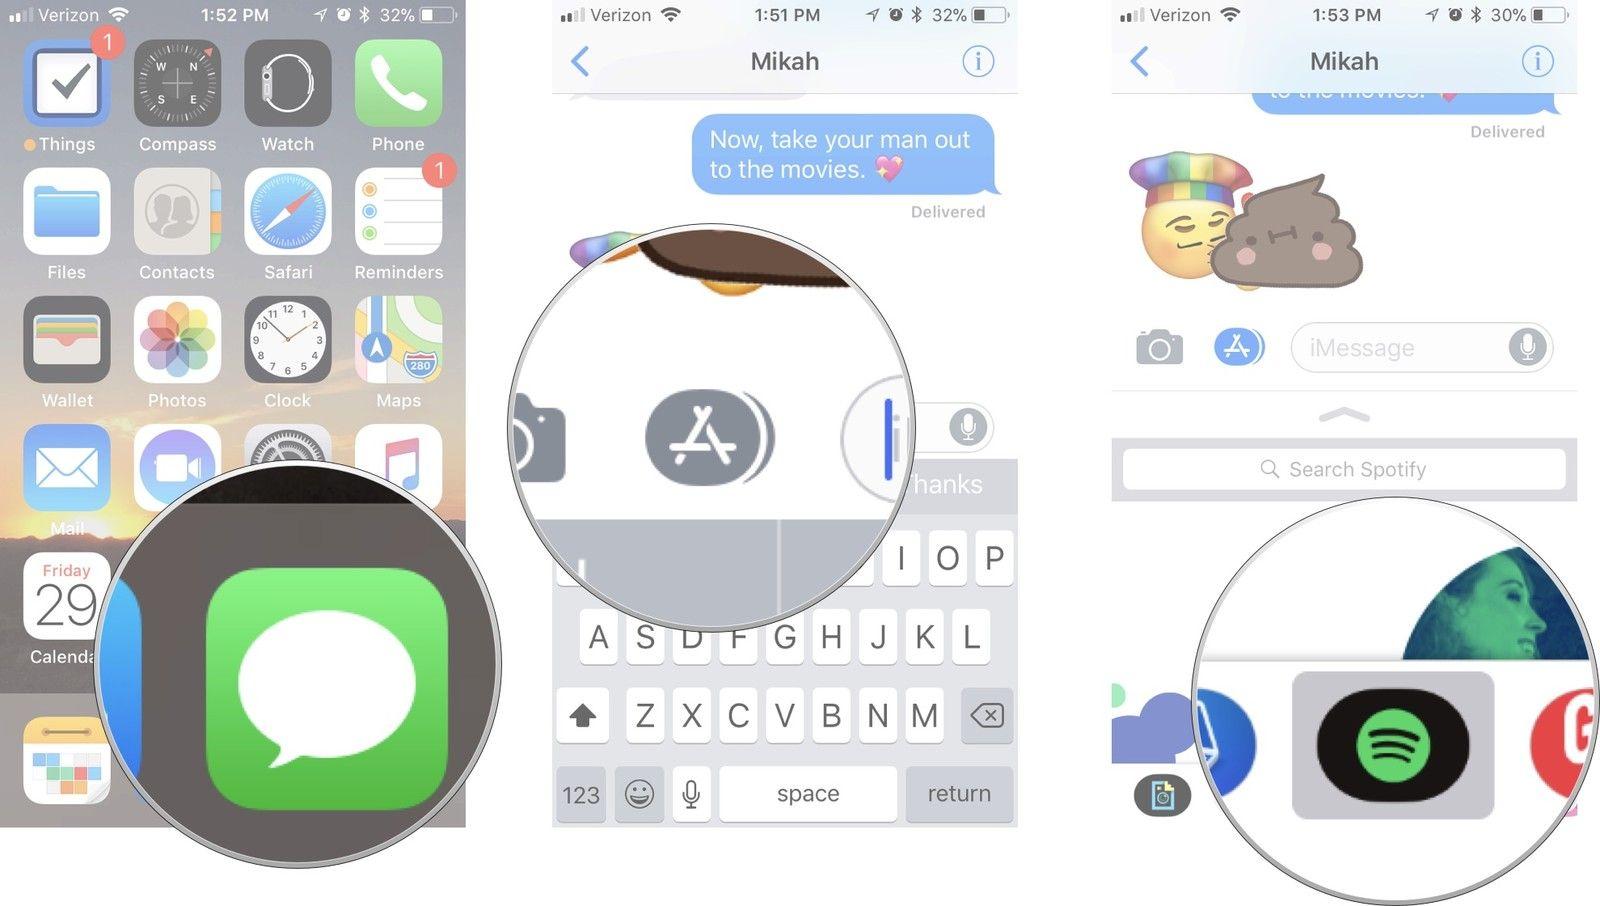 iMessage App Logo - How to use sticker and apps in iMessage on iPhone and iPad